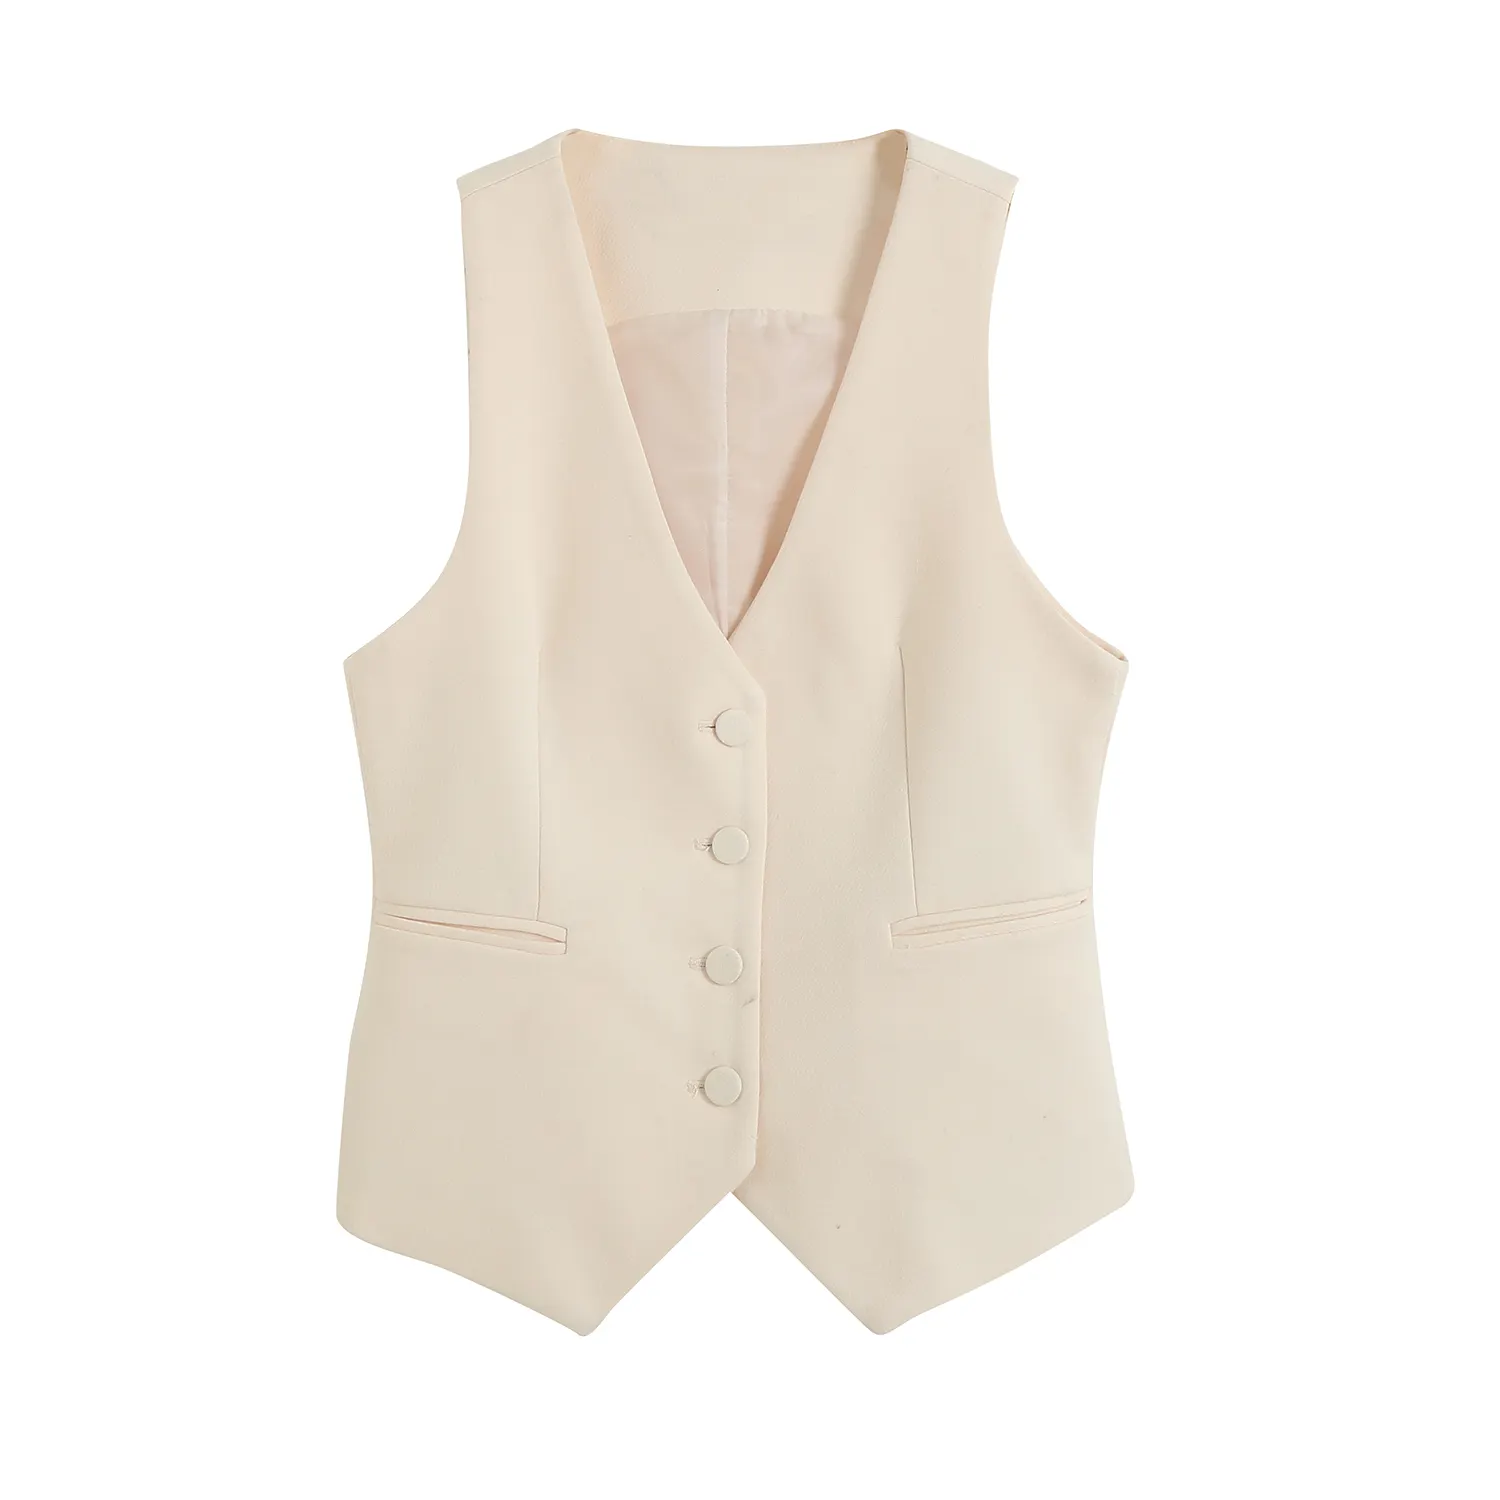 V neck beige color single breasted sleeveless casual fashion women's vests & waistcoats